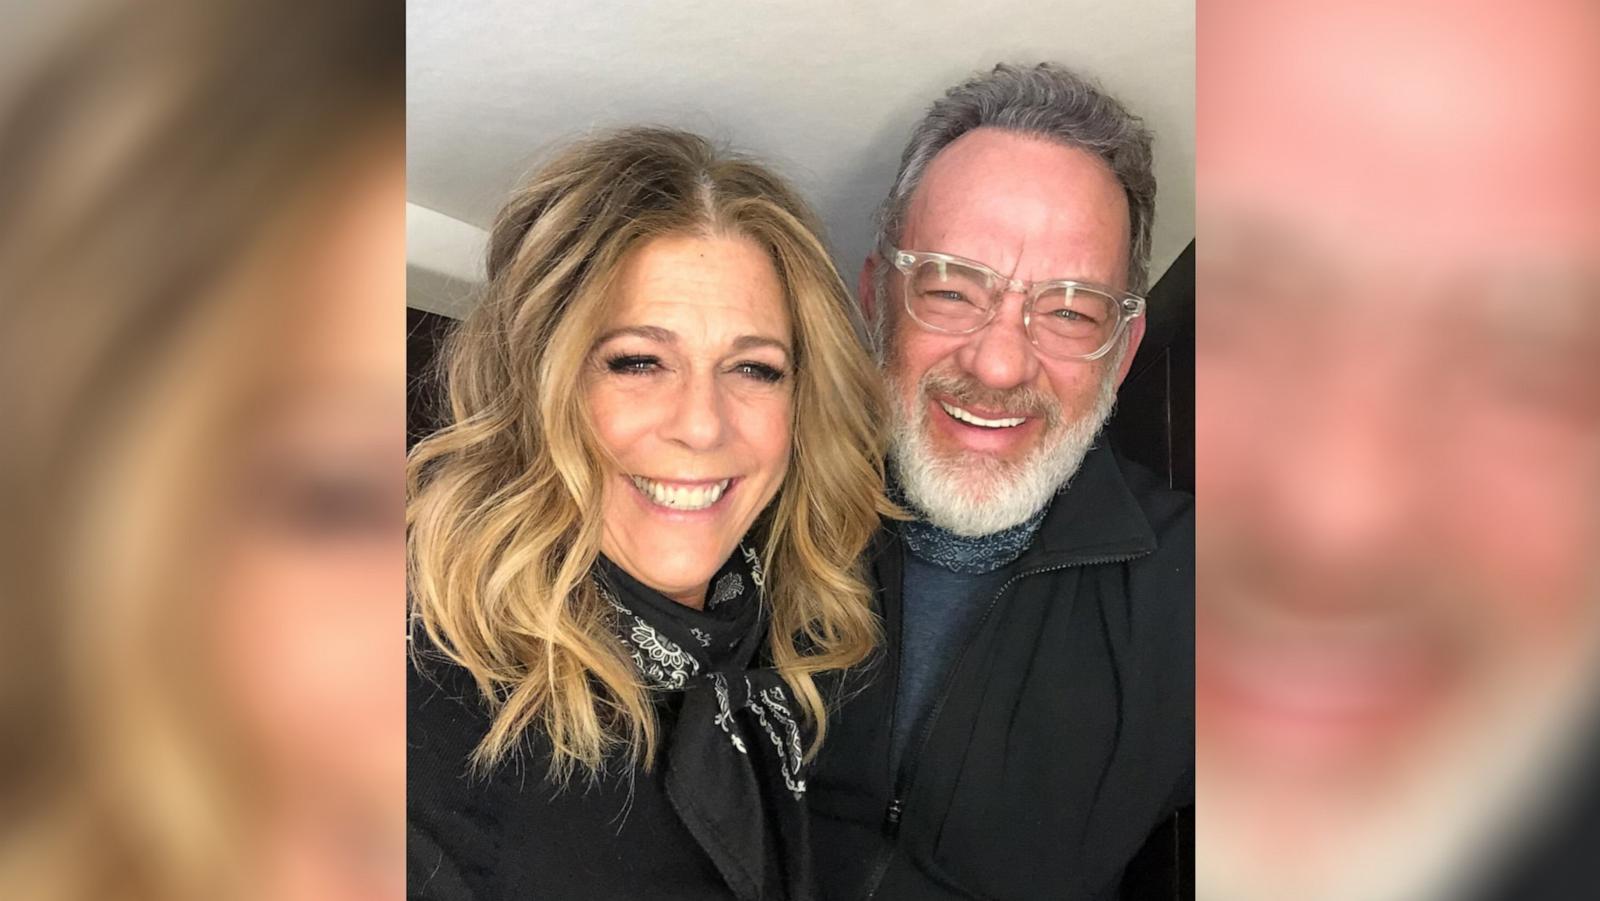 PHOTO: Rita Wilson and Tom Hanks appear in this image that Wilson shared on Instagram.